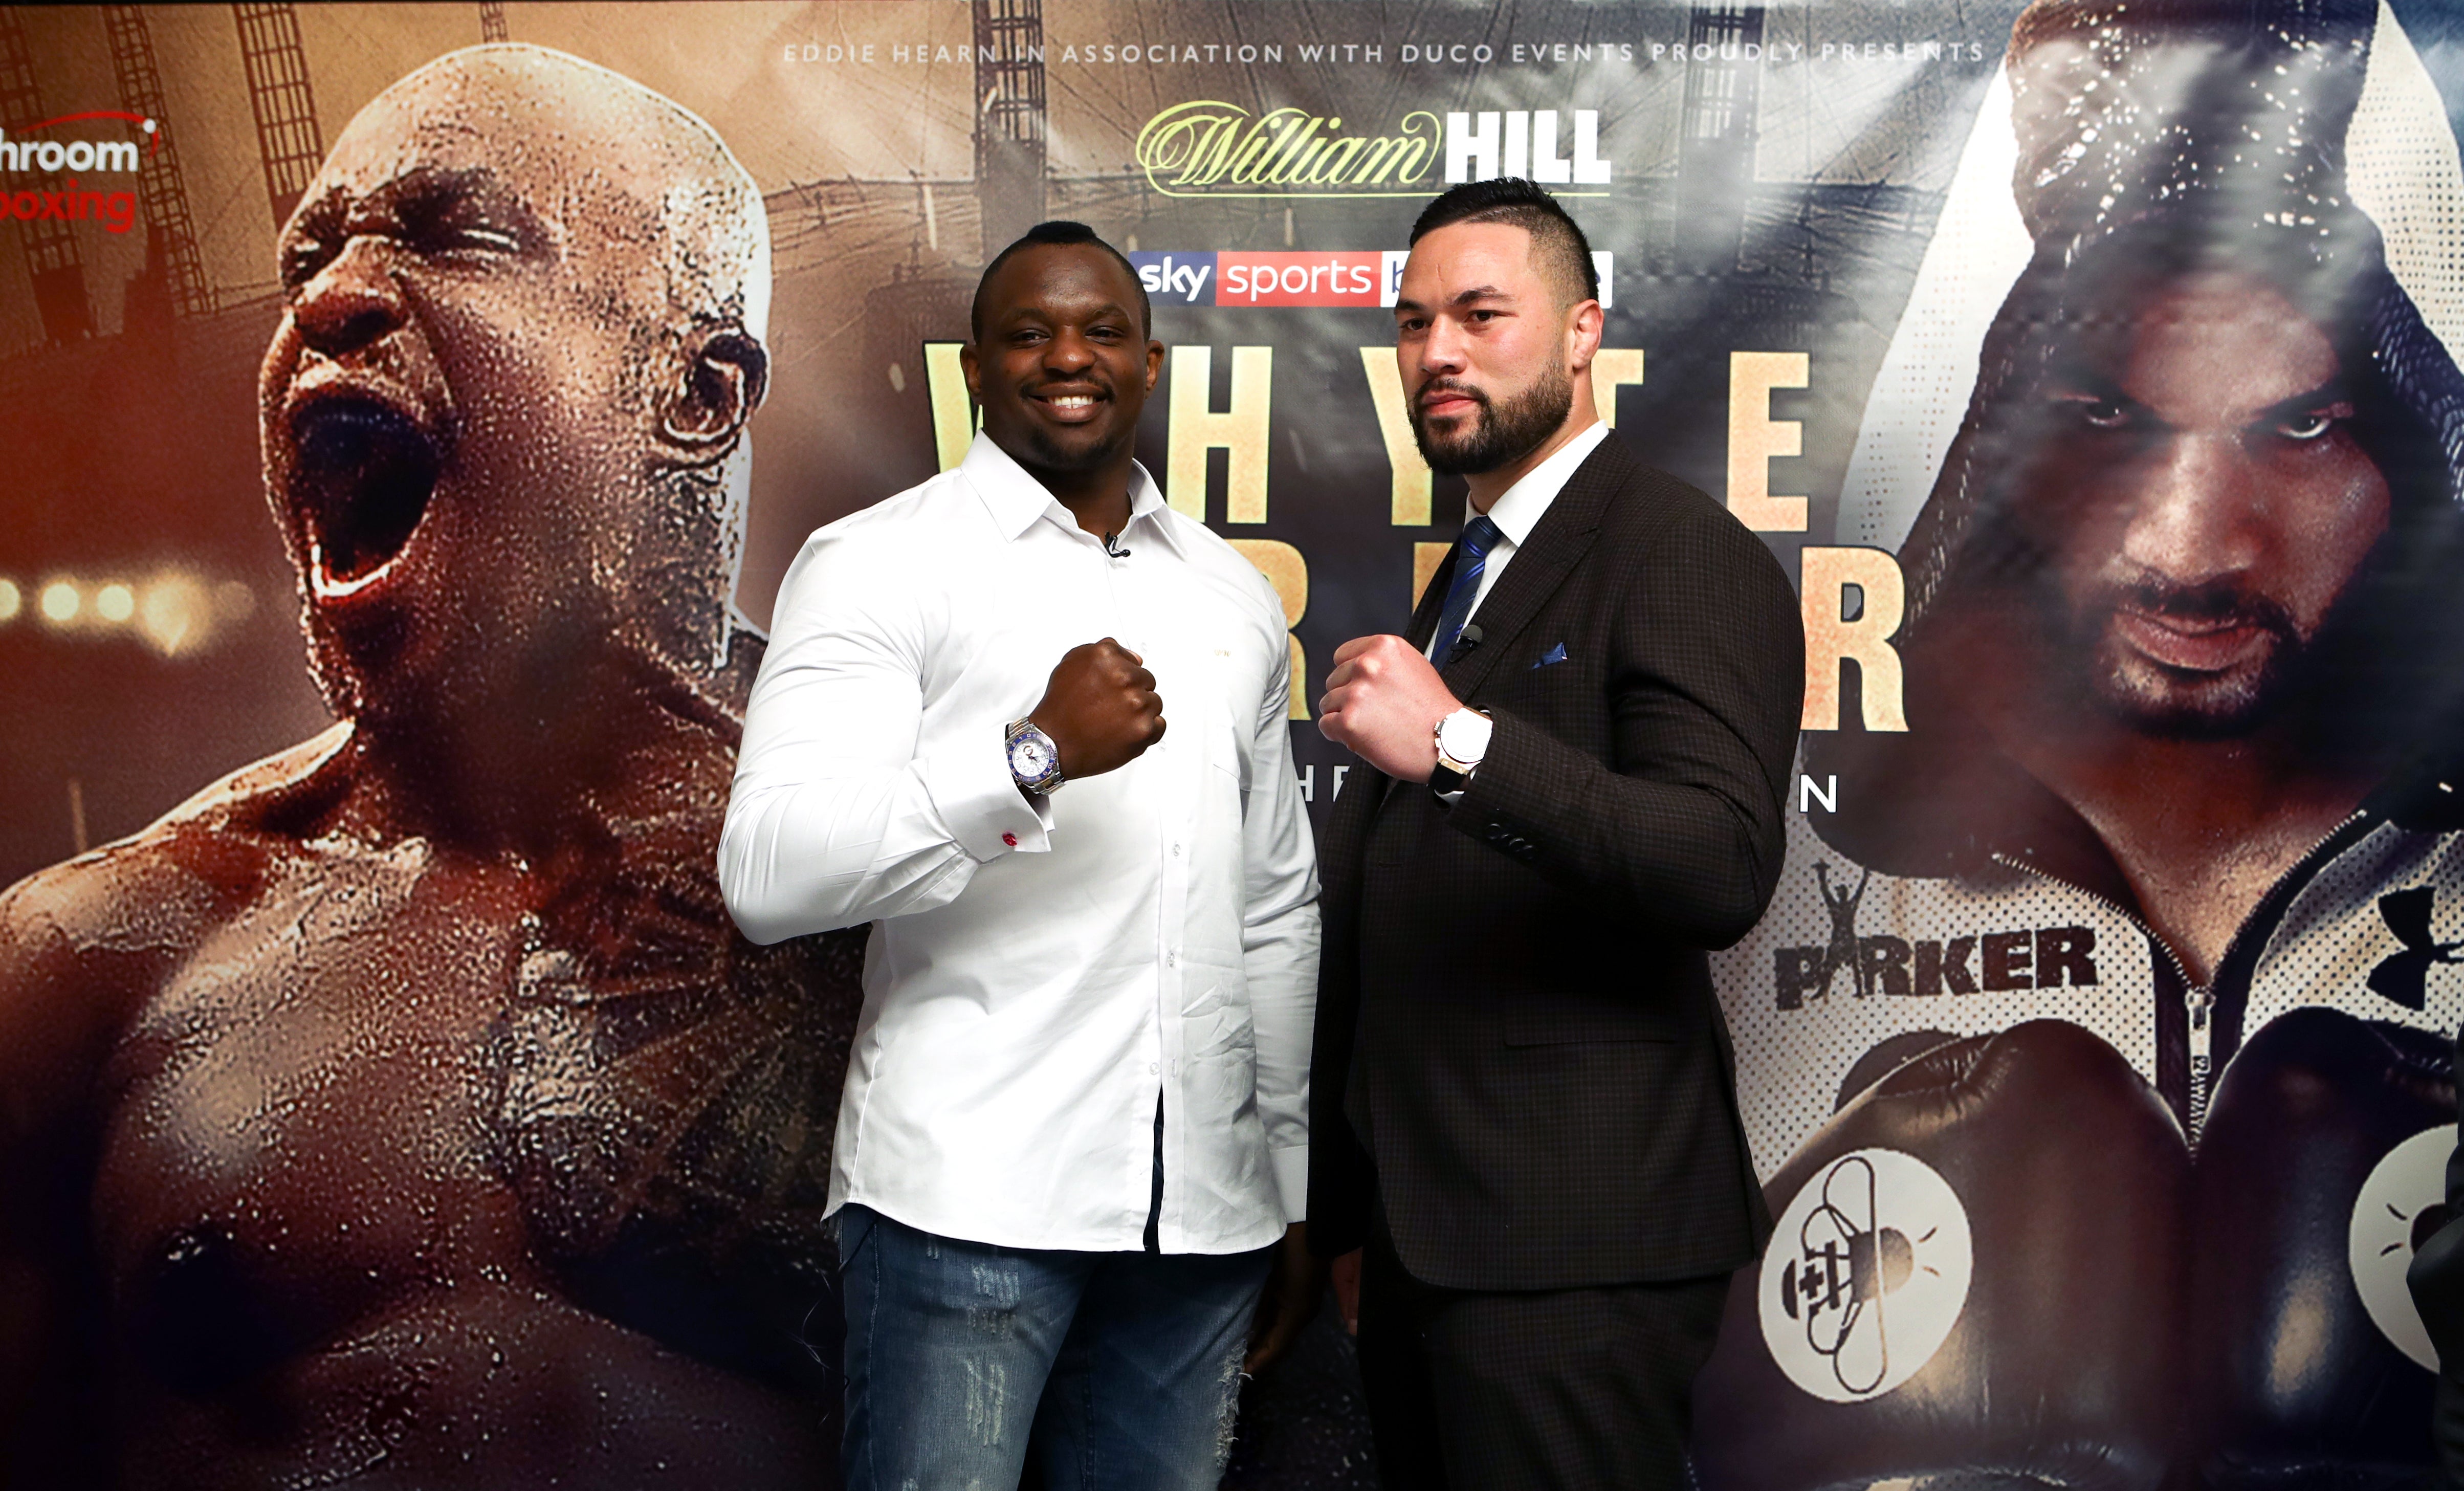 Joseph Parker makes prediction for exciting Tyson Fury vs Dillian Whyte fight The Independent